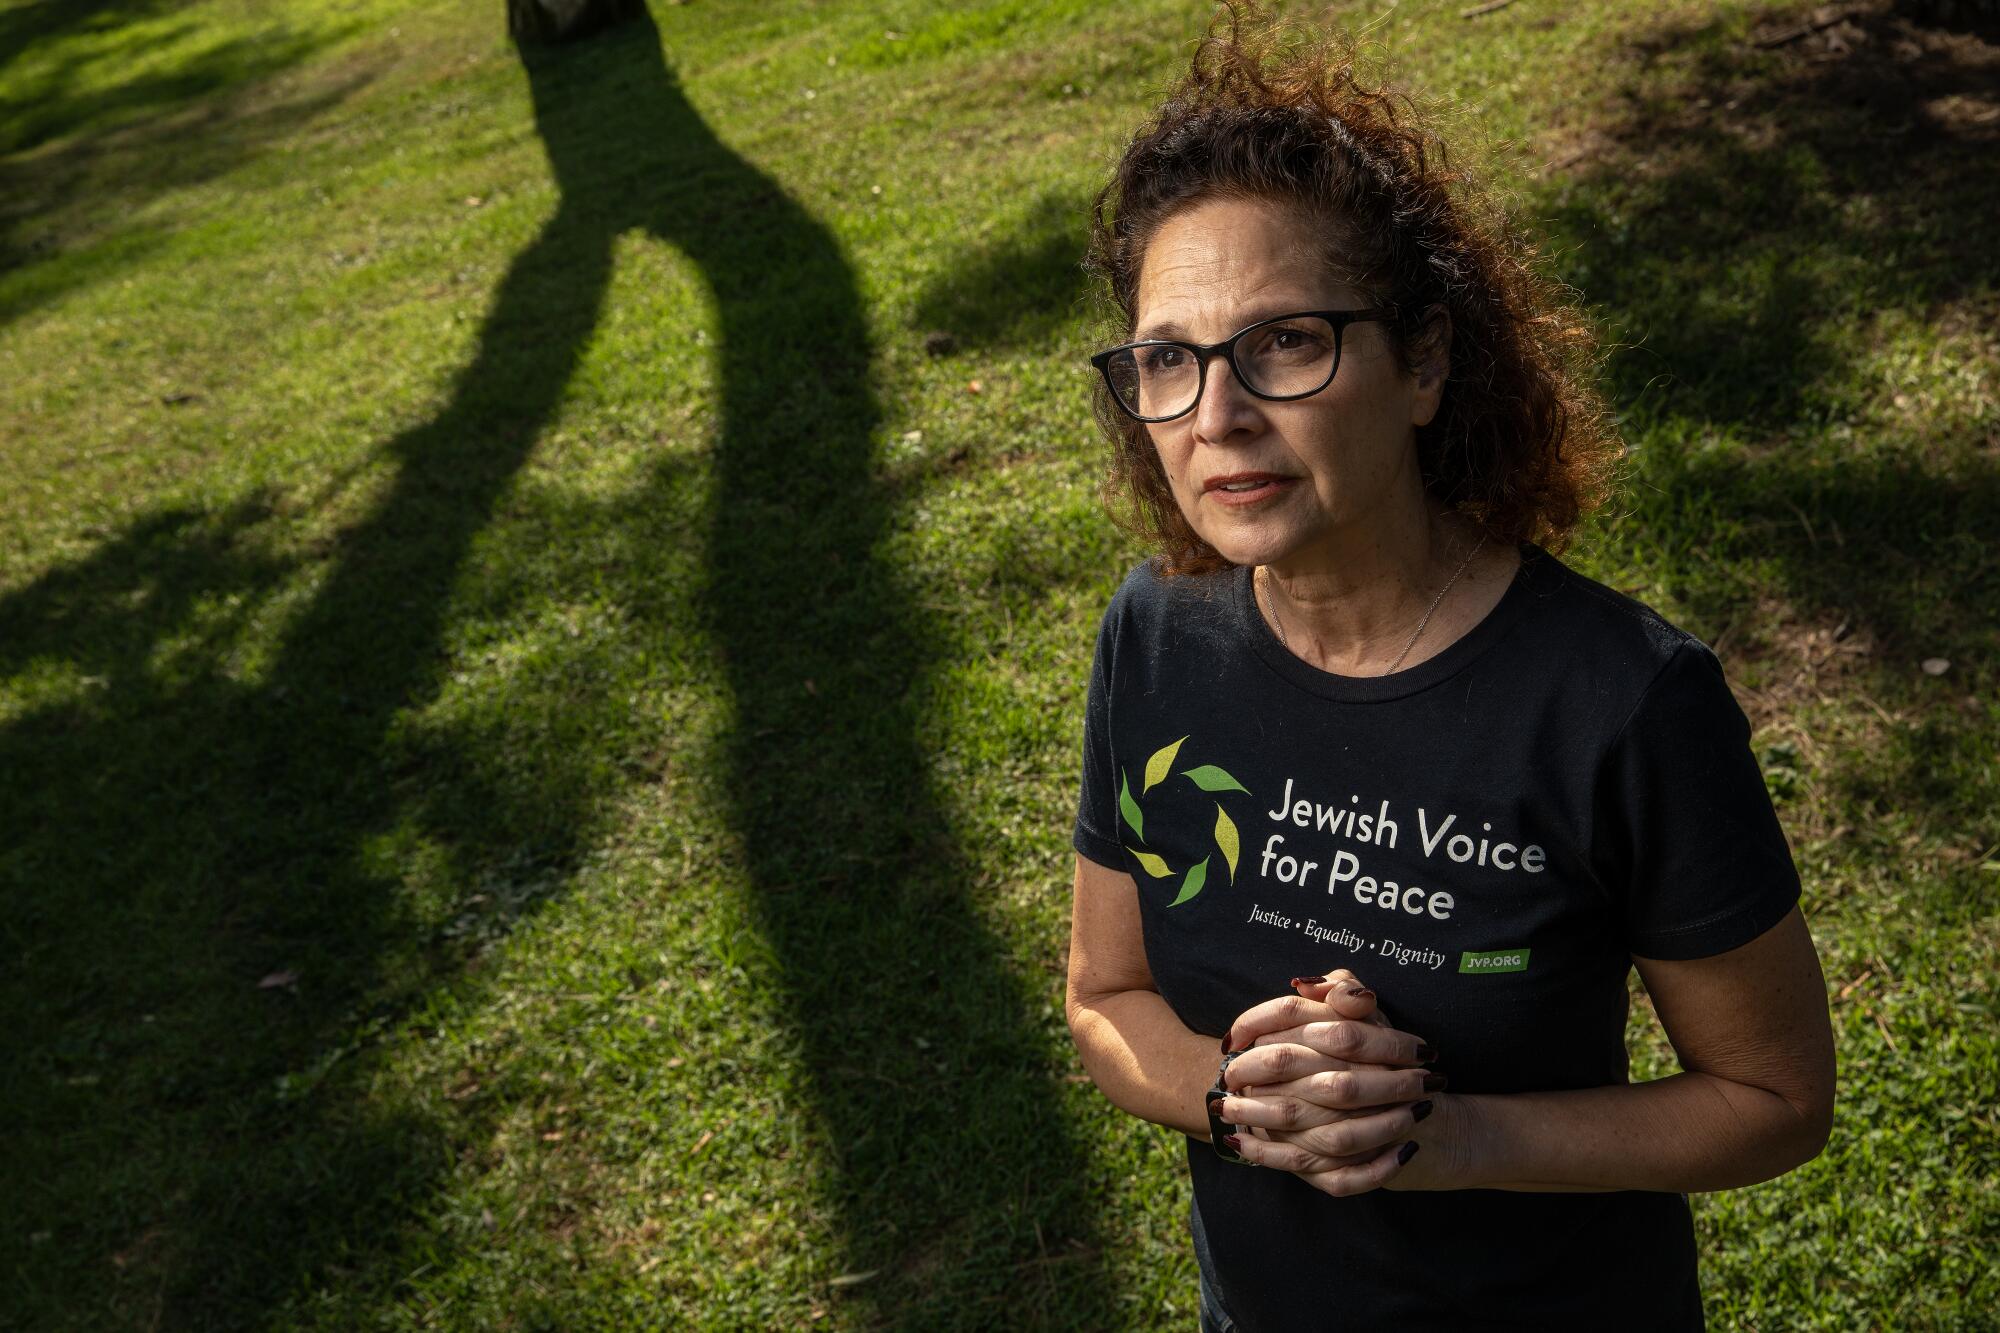 A woman in a black "Jewish Voice for Peace" T-shirt clasps her hands as she stands in grass, framed by the shadows of trees